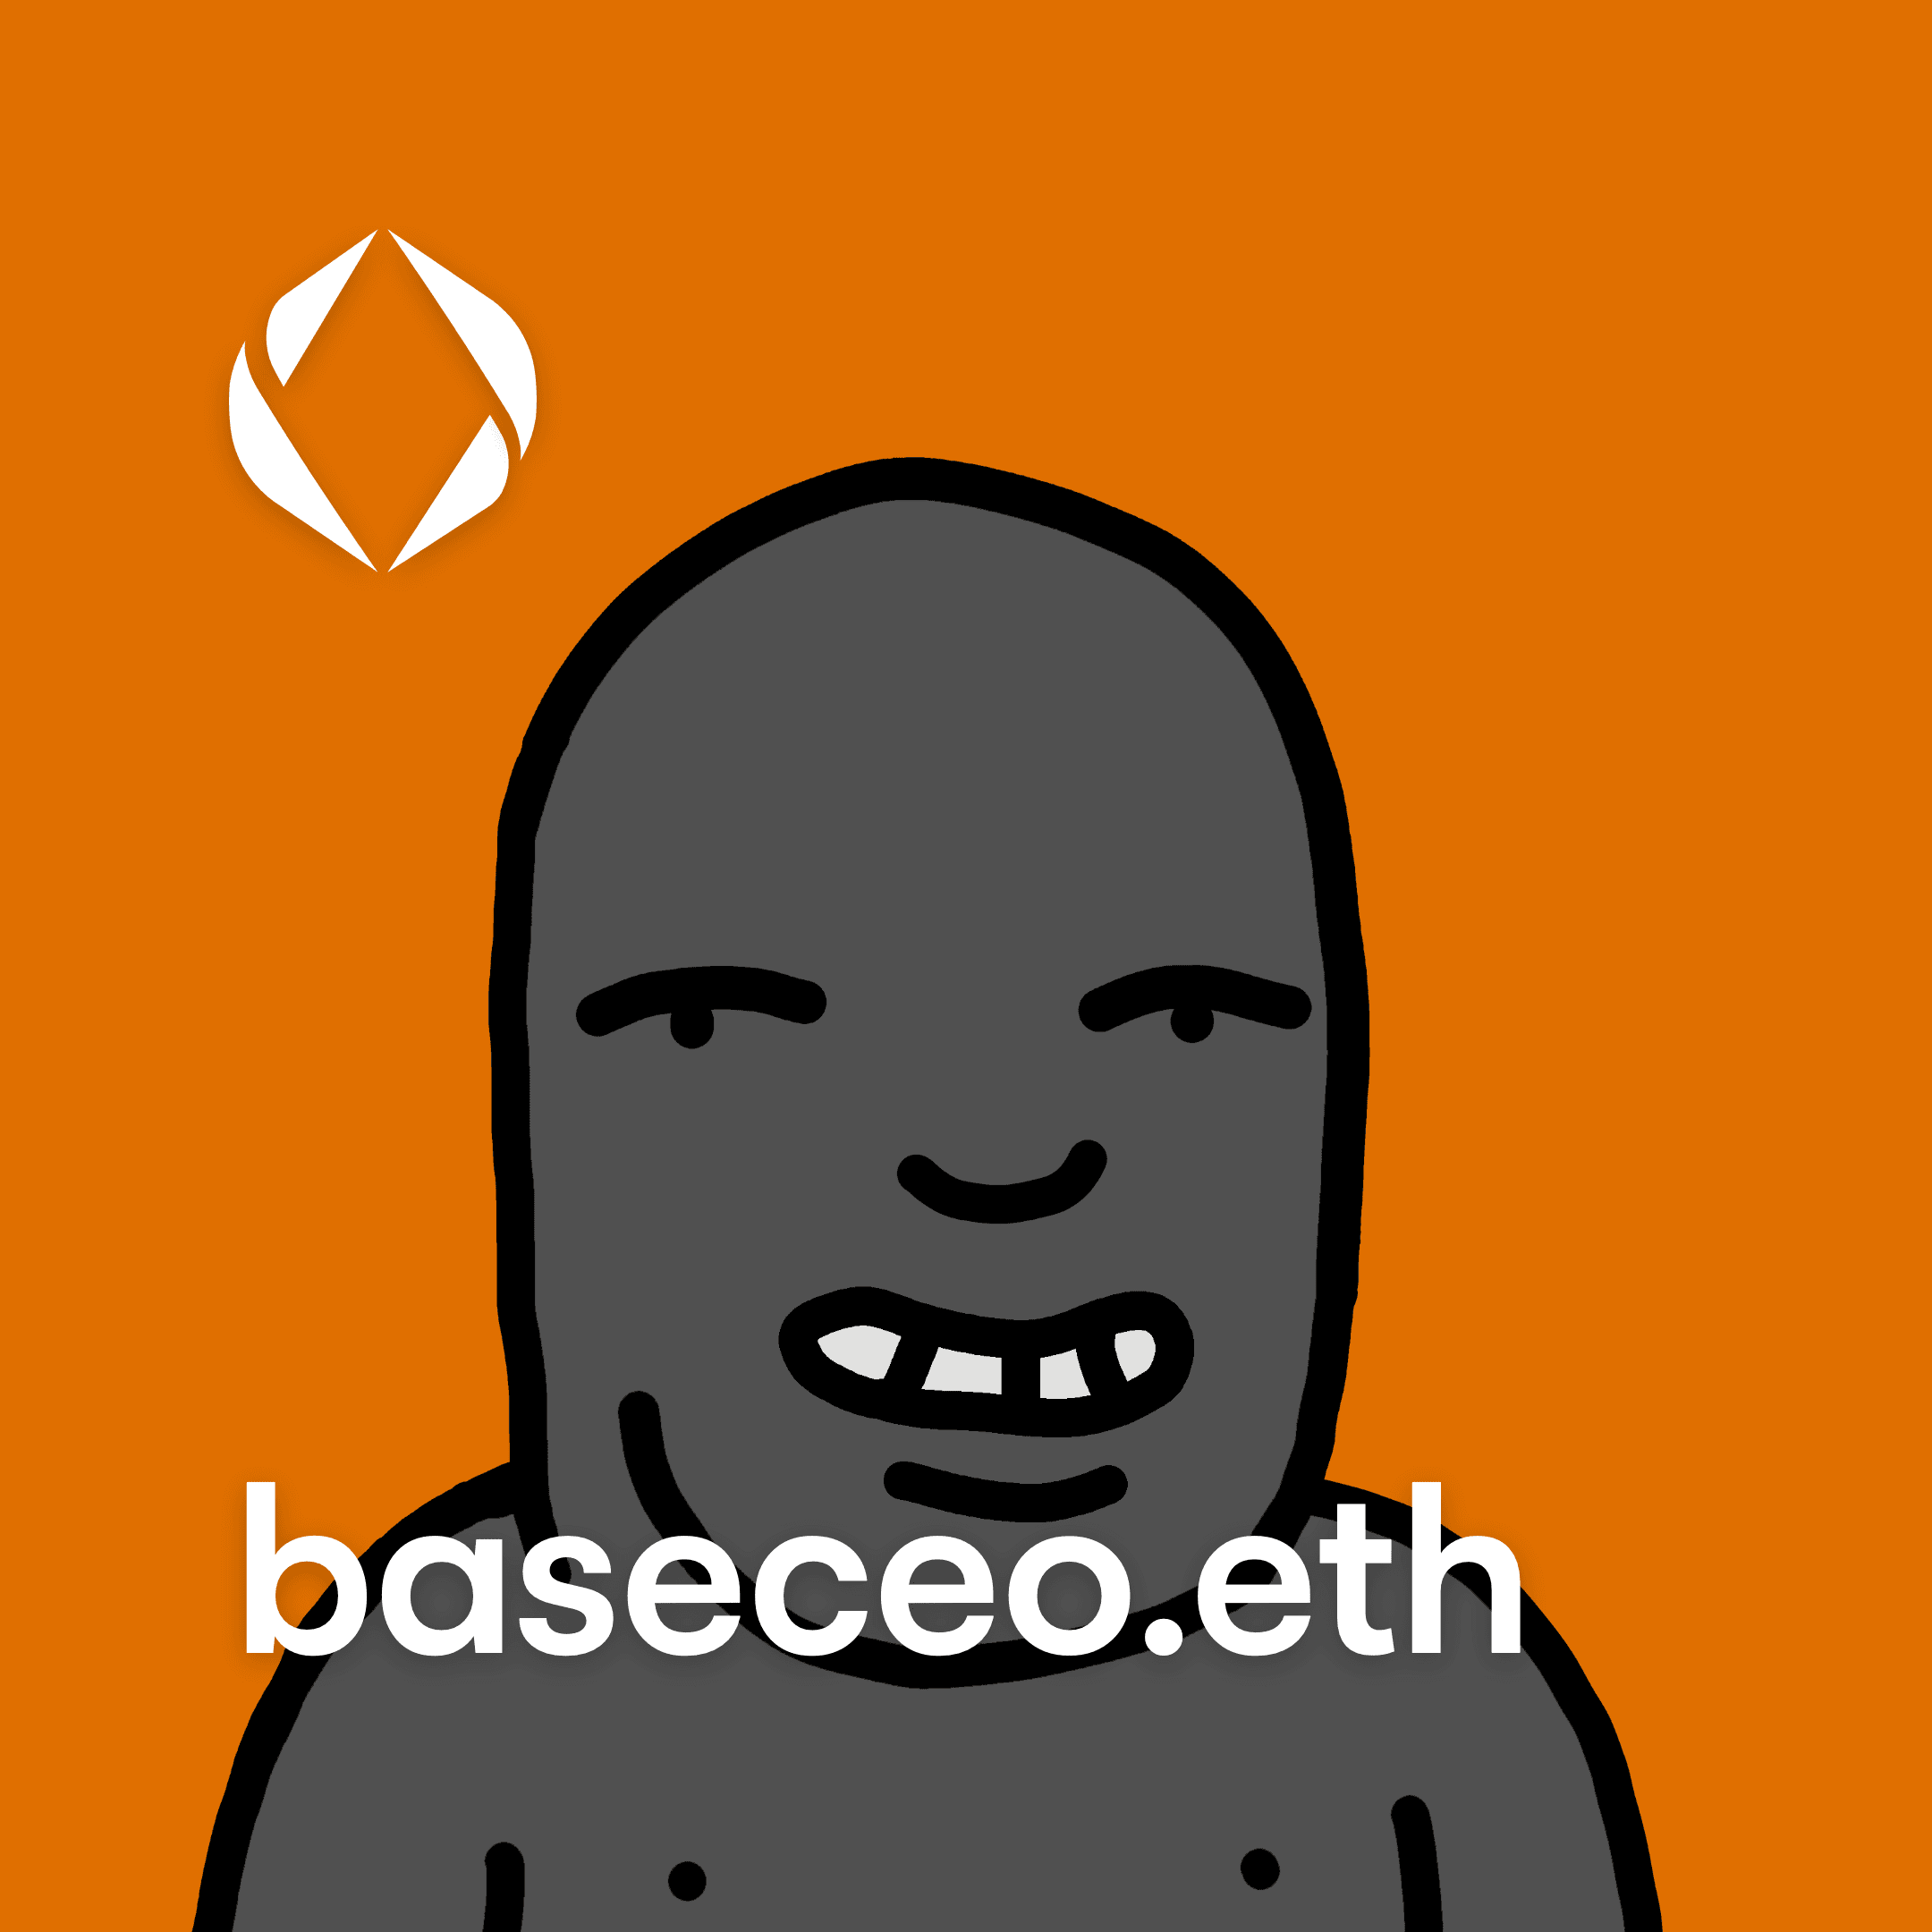 baseceo.eth